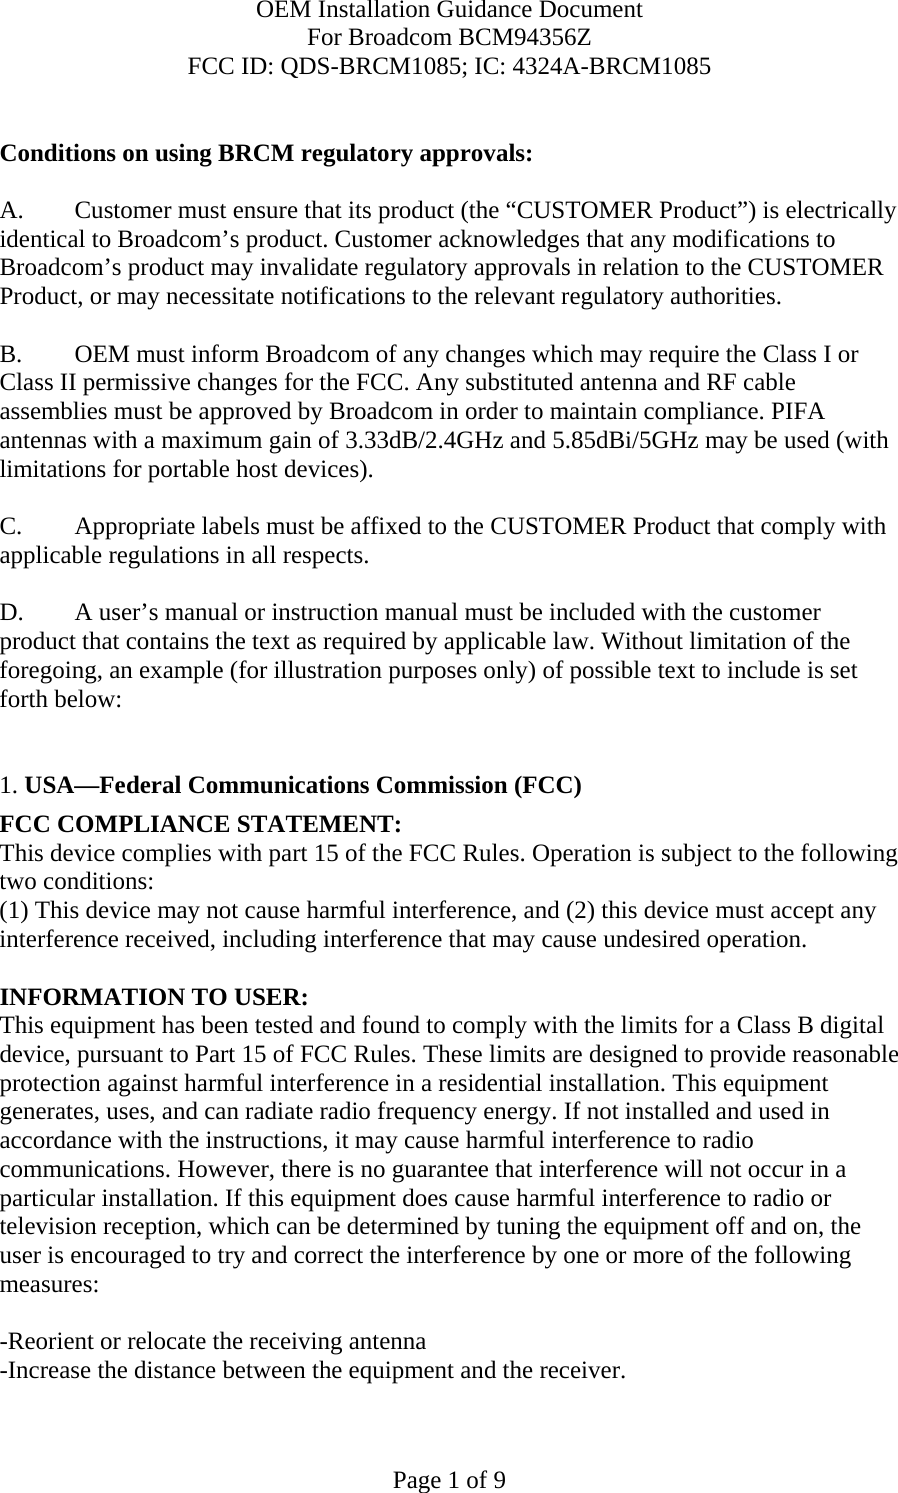 OEM Installation Guidance Document For Broadcom BCM94356Z FCC ID: QDS-BRCM1085; IC: 4324A-BRCM1085  Page 1 of 9  Conditions on using BRCM regulatory approvals:   A.  Customer must ensure that its product (the “CUSTOMER Product”) is electrically identical to Broadcom’s product. Customer acknowledges that any modifications to Broadcom’s product may invalidate regulatory approvals in relation to the CUSTOMER Product, or may necessitate notifications to the relevant regulatory authorities.   B.   OEM must inform Broadcom of any changes which may require the Class I or Class II permissive changes for the FCC. Any substituted antenna and RF cable assemblies must be approved by Broadcom in order to maintain compliance. PIFA antennas with a maximum gain of 3.33dB/2.4GHz and 5.85dBi/5GHz may be used (with limitations for portable host devices).  C.  Appropriate labels must be affixed to the CUSTOMER Product that comply with applicable regulations in all respects.    D.   A user’s manual or instruction manual must be included with the customer product that contains the text as required by applicable law. Without limitation of the foregoing, an example (for illustration purposes only) of possible text to include is set forth below:    1. USA—Federal Communications Commission (FCC) FCC COMPLIANCE STATEMENT: This device complies with part 15 of the FCC Rules. Operation is subject to the following two conditions: (1) This device may not cause harmful interference, and (2) this device must accept any interference received, including interference that may cause undesired operation.  INFORMATION TO USER: This equipment has been tested and found to comply with the limits for a Class B digital device, pursuant to Part 15 of FCC Rules. These limits are designed to provide reasonable protection against harmful interference in a residential installation. This equipment generates, uses, and can radiate radio frequency energy. If not installed and used in accordance with the instructions, it may cause harmful interference to radio communications. However, there is no guarantee that interference will not occur in a particular installation. If this equipment does cause harmful interference to radio or television reception, which can be determined by tuning the equipment off and on, the user is encouraged to try and correct the interference by one or more of the following measures:   -Reorient or relocate the receiving antenna -Increase the distance between the equipment and the receiver. 